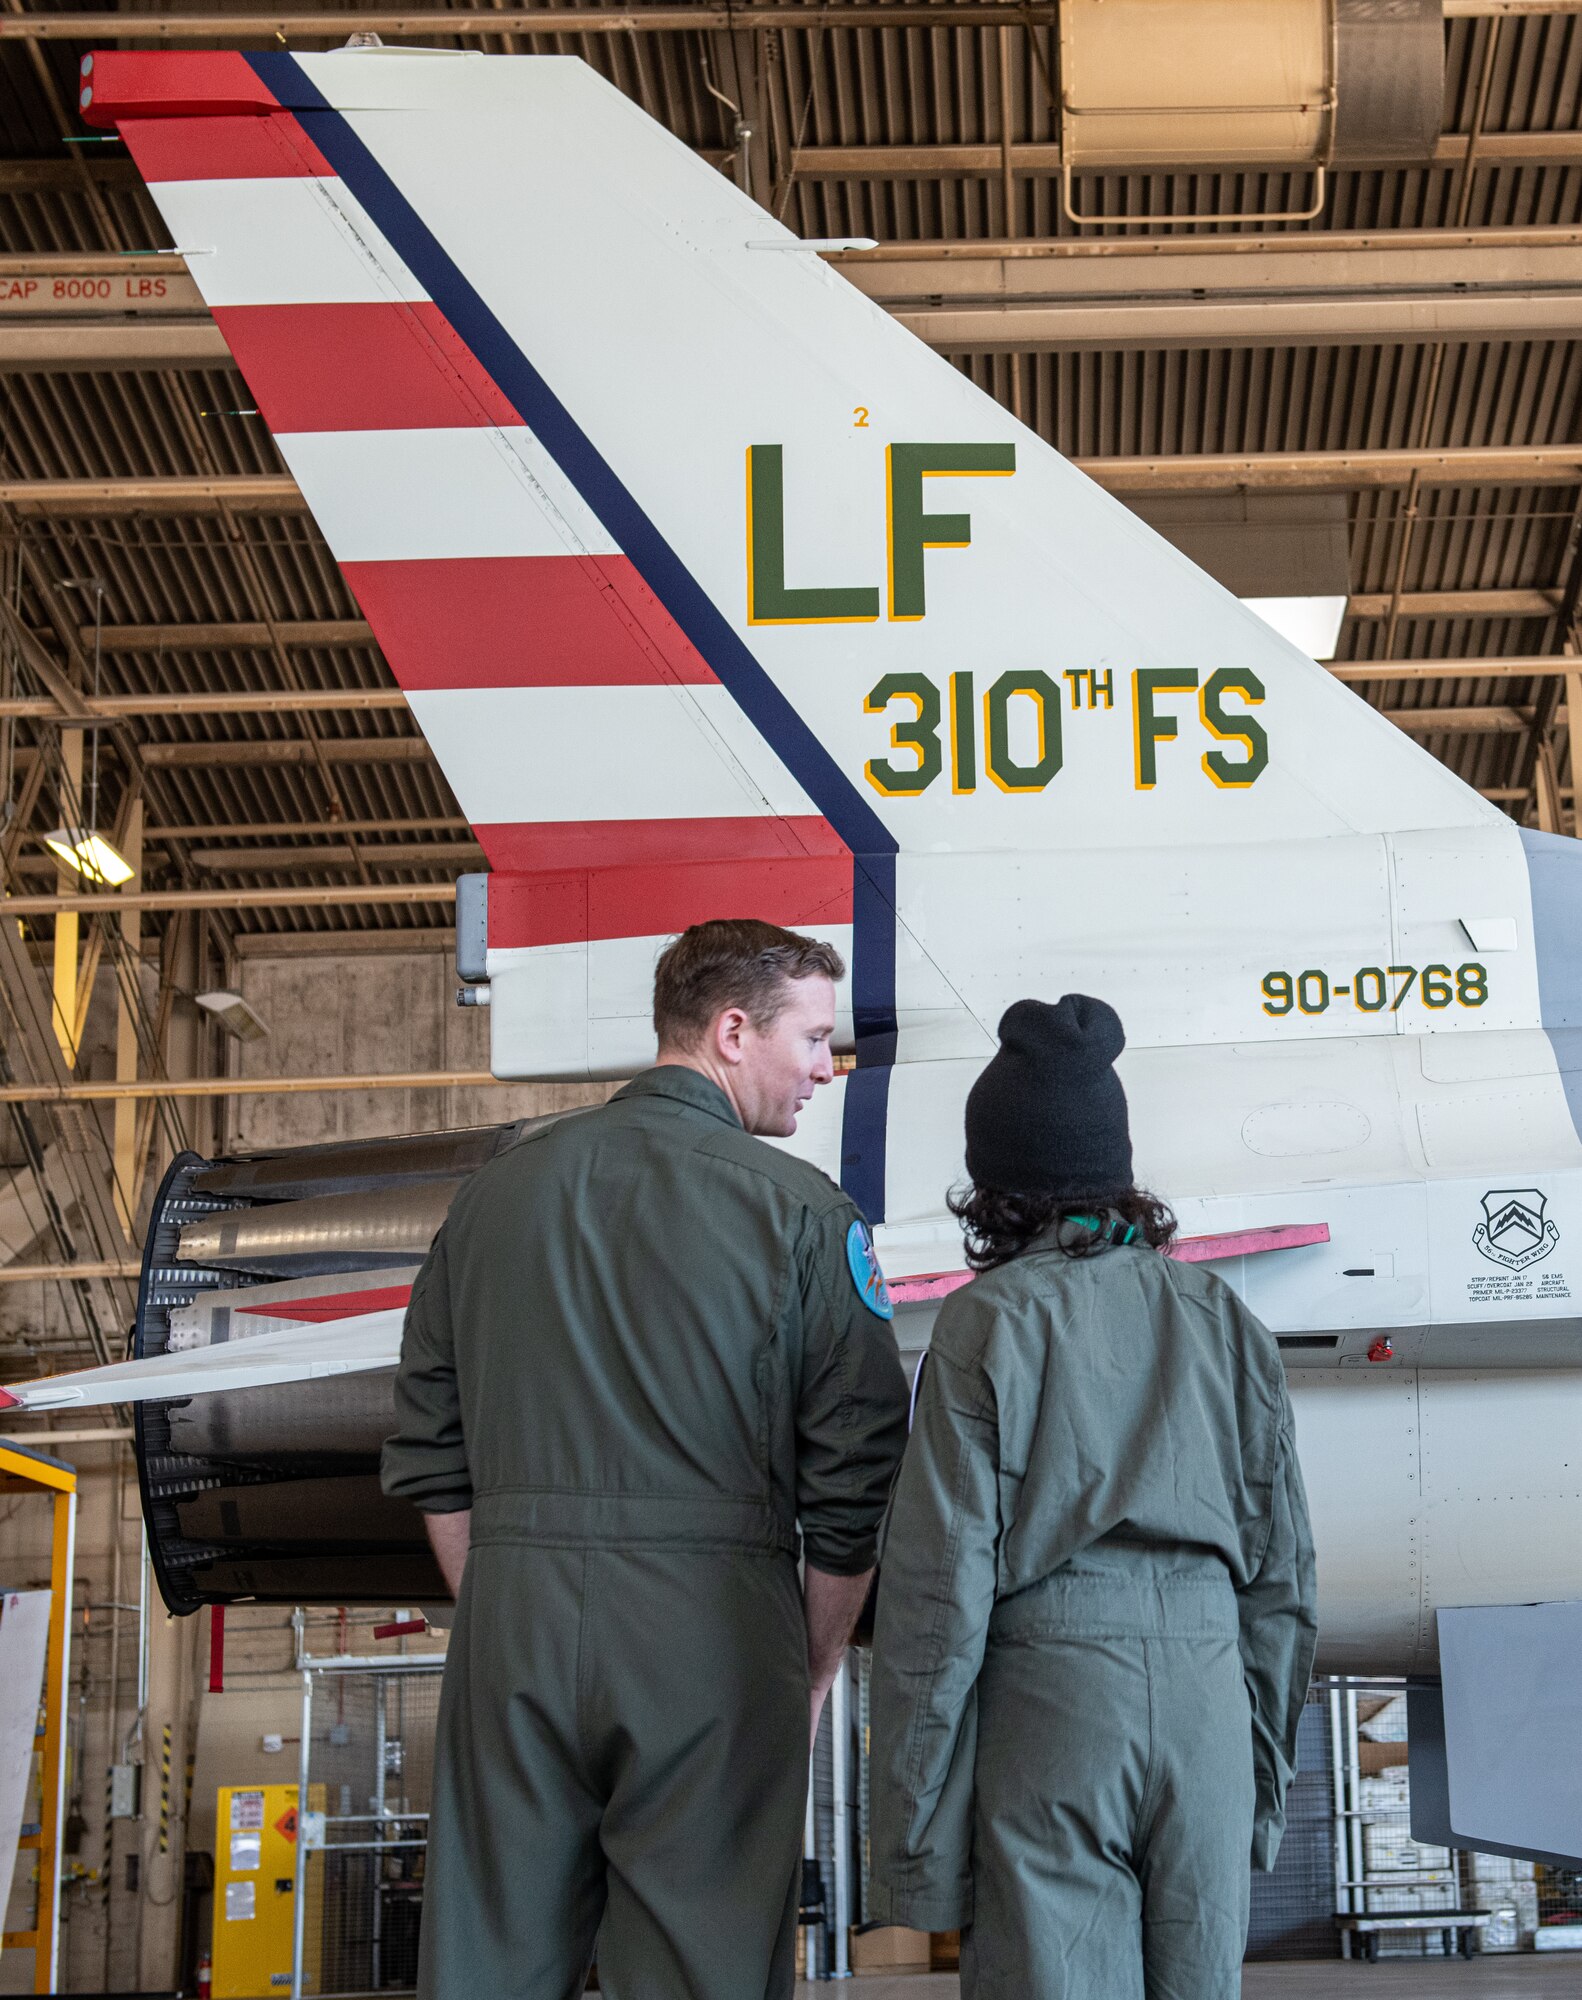 Ian “Monky Warrior” Brito, Pilot for a Day participant, receives a tour of an F-16 Fighting Falcon from Capt. Sebastian Hill, 310th Fighter Squadron pilot, Feb. 25, 2022, at Luke Air Force Base, Arizona.